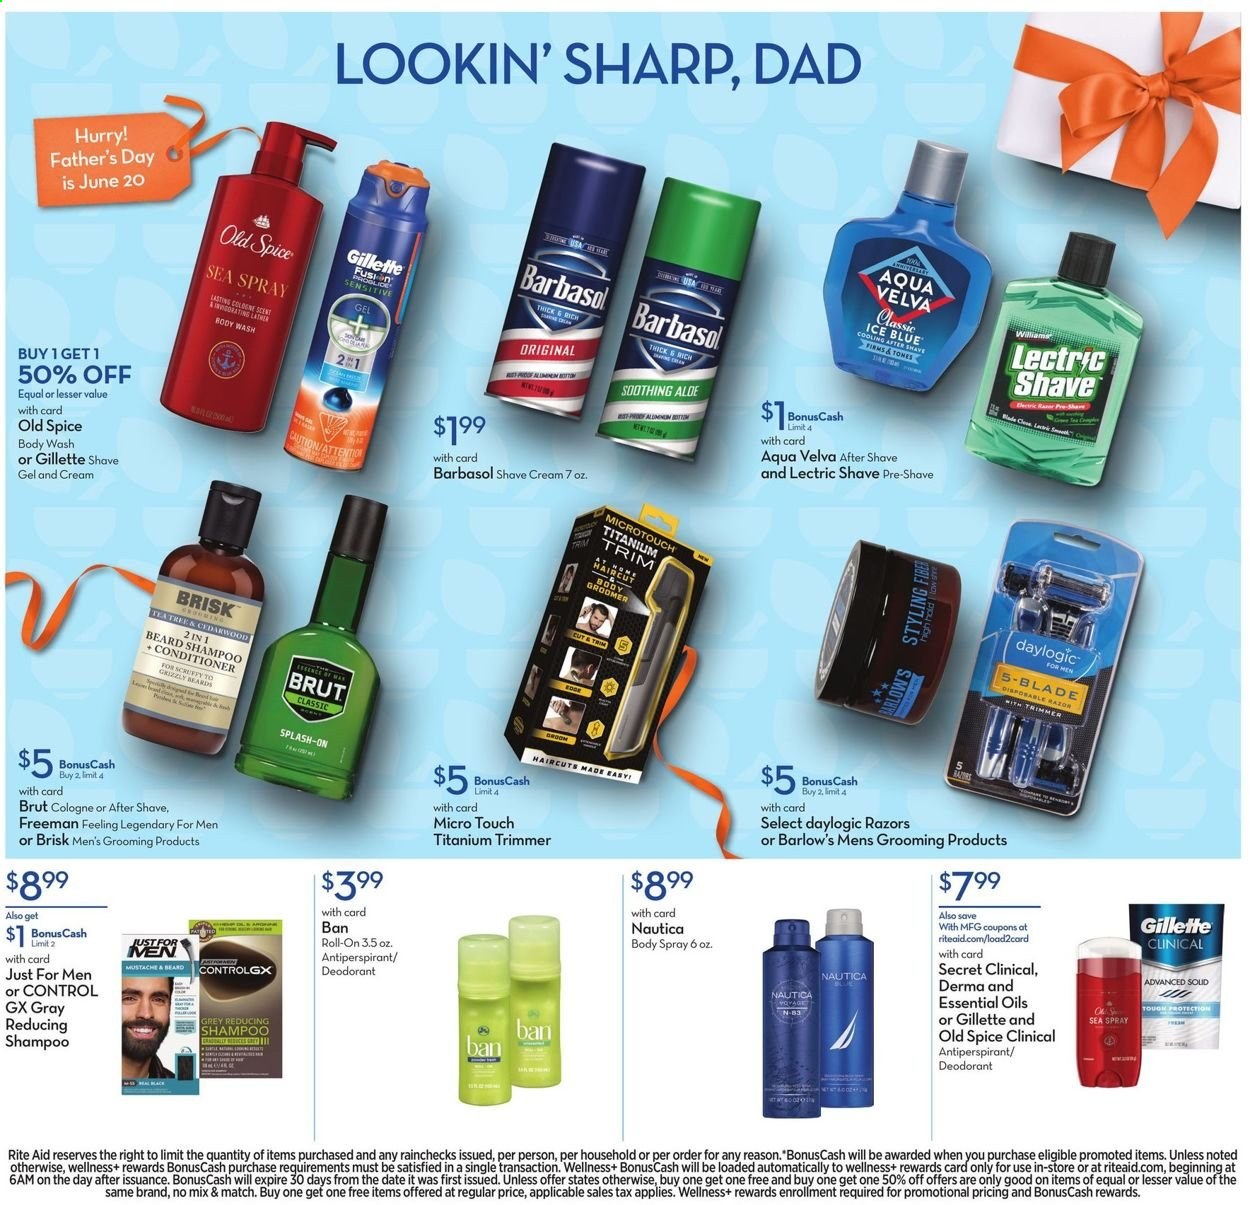 thumbnail - RITE AID Flyer - 06/20/2021 - 06/26/2021 - Sales products - spice, tea, body wash, shampoo, Old Spice, Daylogic, conditioner, body spray, after shave, anti-perspirant, cologne, roll-on, deodorant, Brut, Gillette, shave gel, Barbasol, shave cream, disposable razor, trimmer, essential oils, tea tree. Page 12.